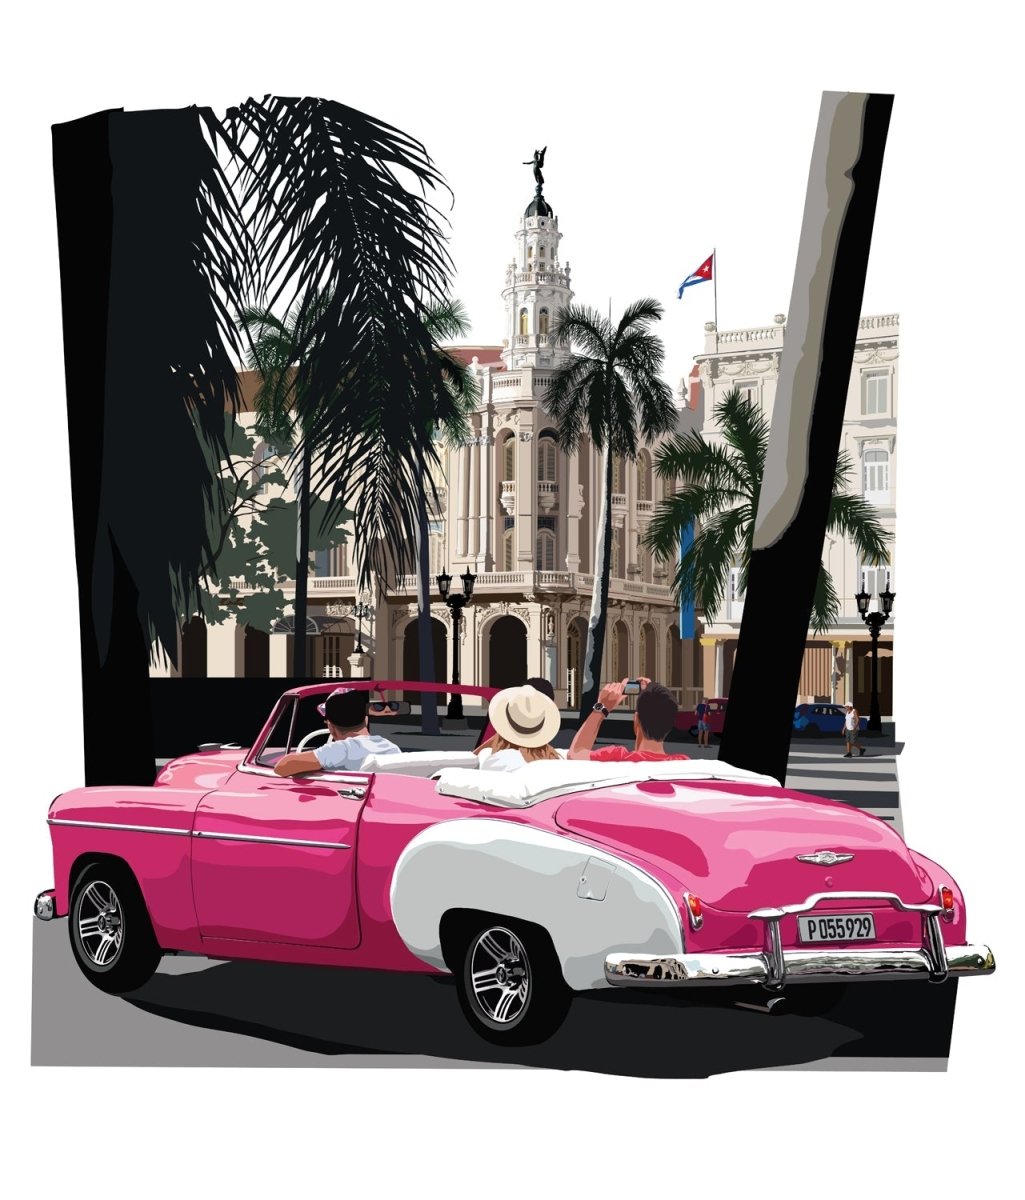 1952 Chevrolet convertible | image1 | Signed Limited Edtion Print